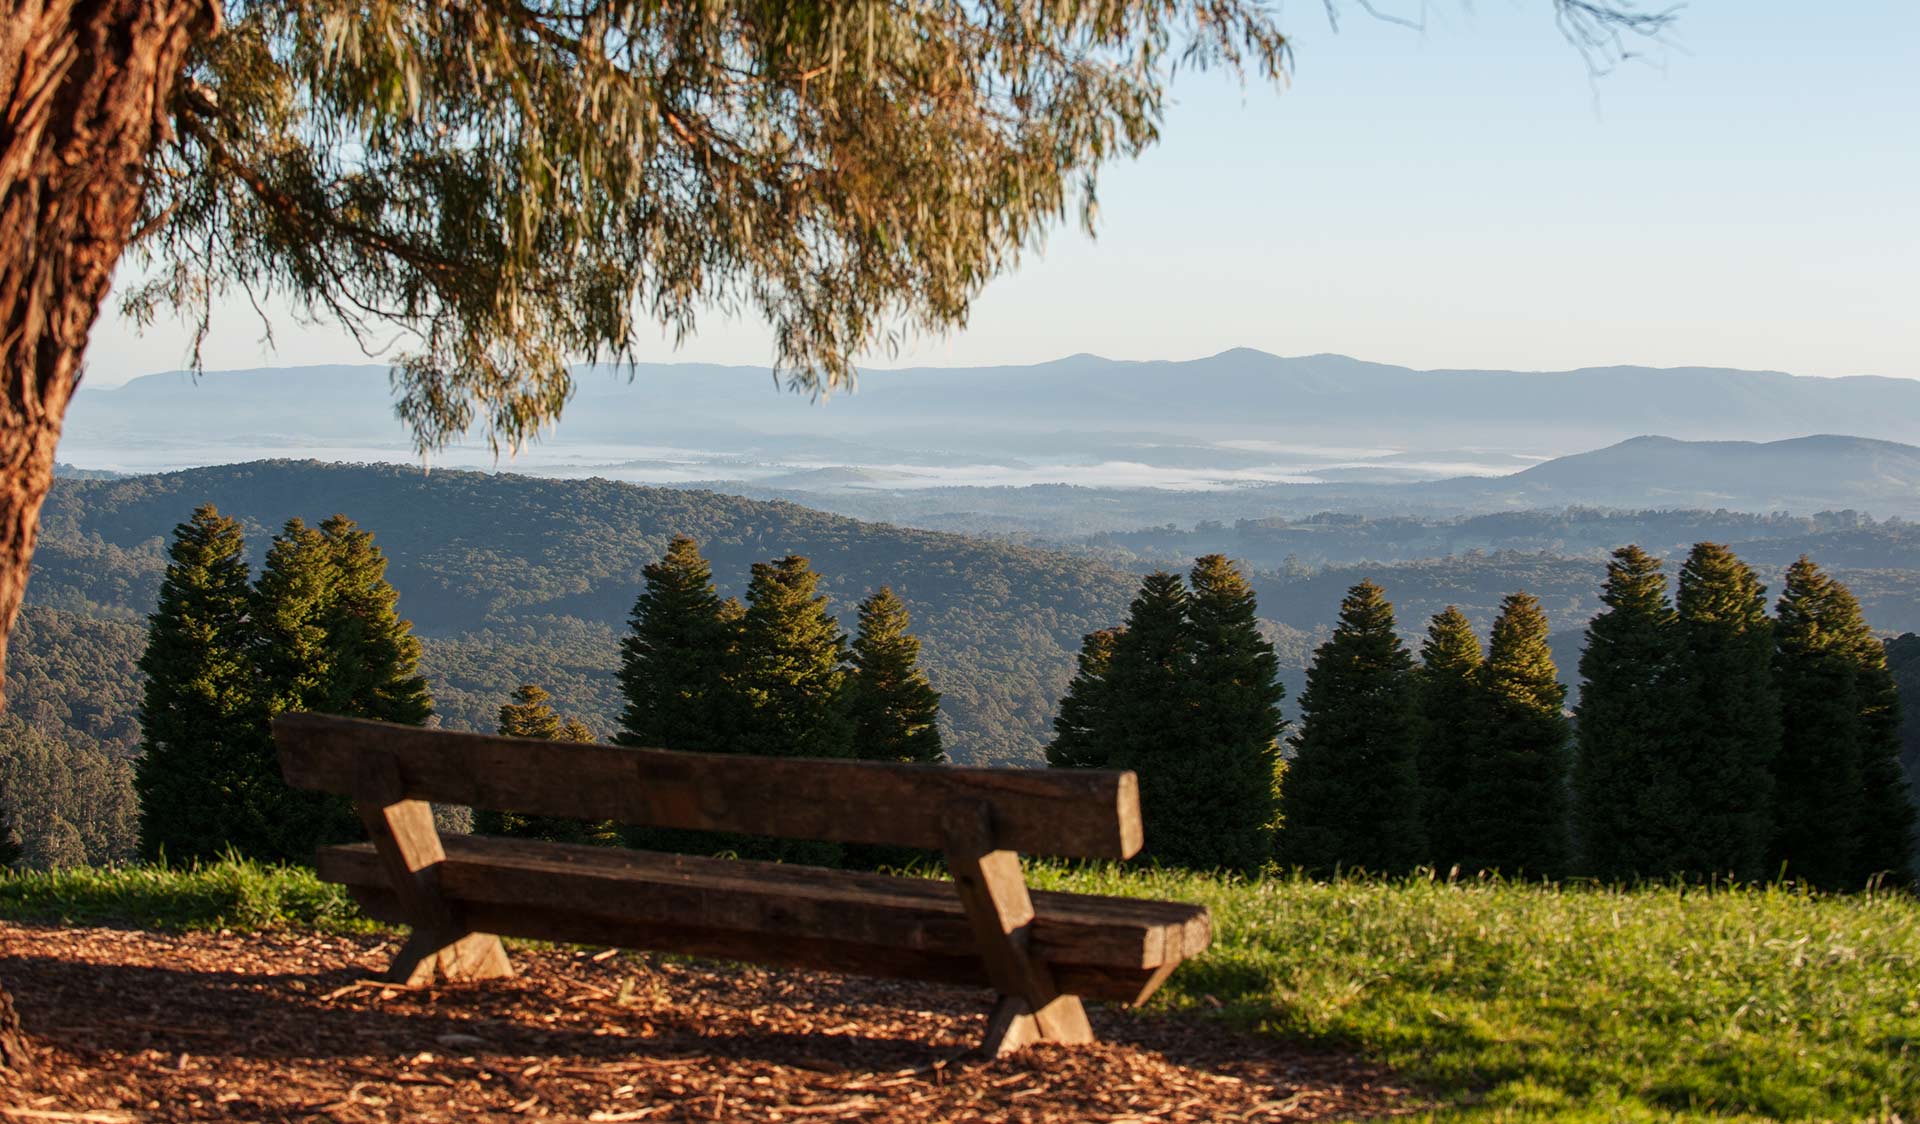 The view from the RJ Hamer Arboretum in the Dandenong Ranges National Park. 